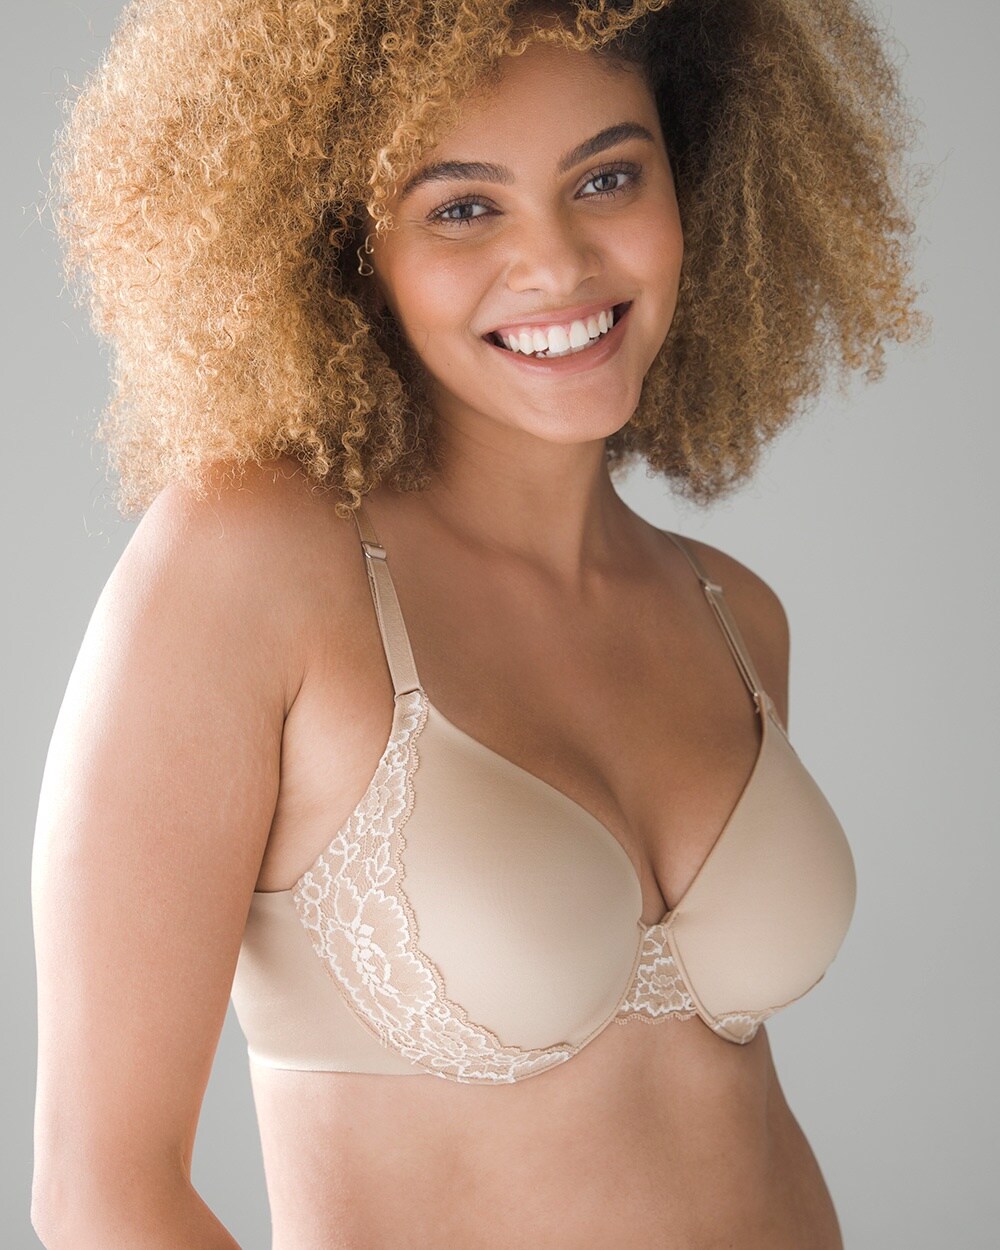 Soma Bras Are Only $15 for the Brand's Anniversary Sale